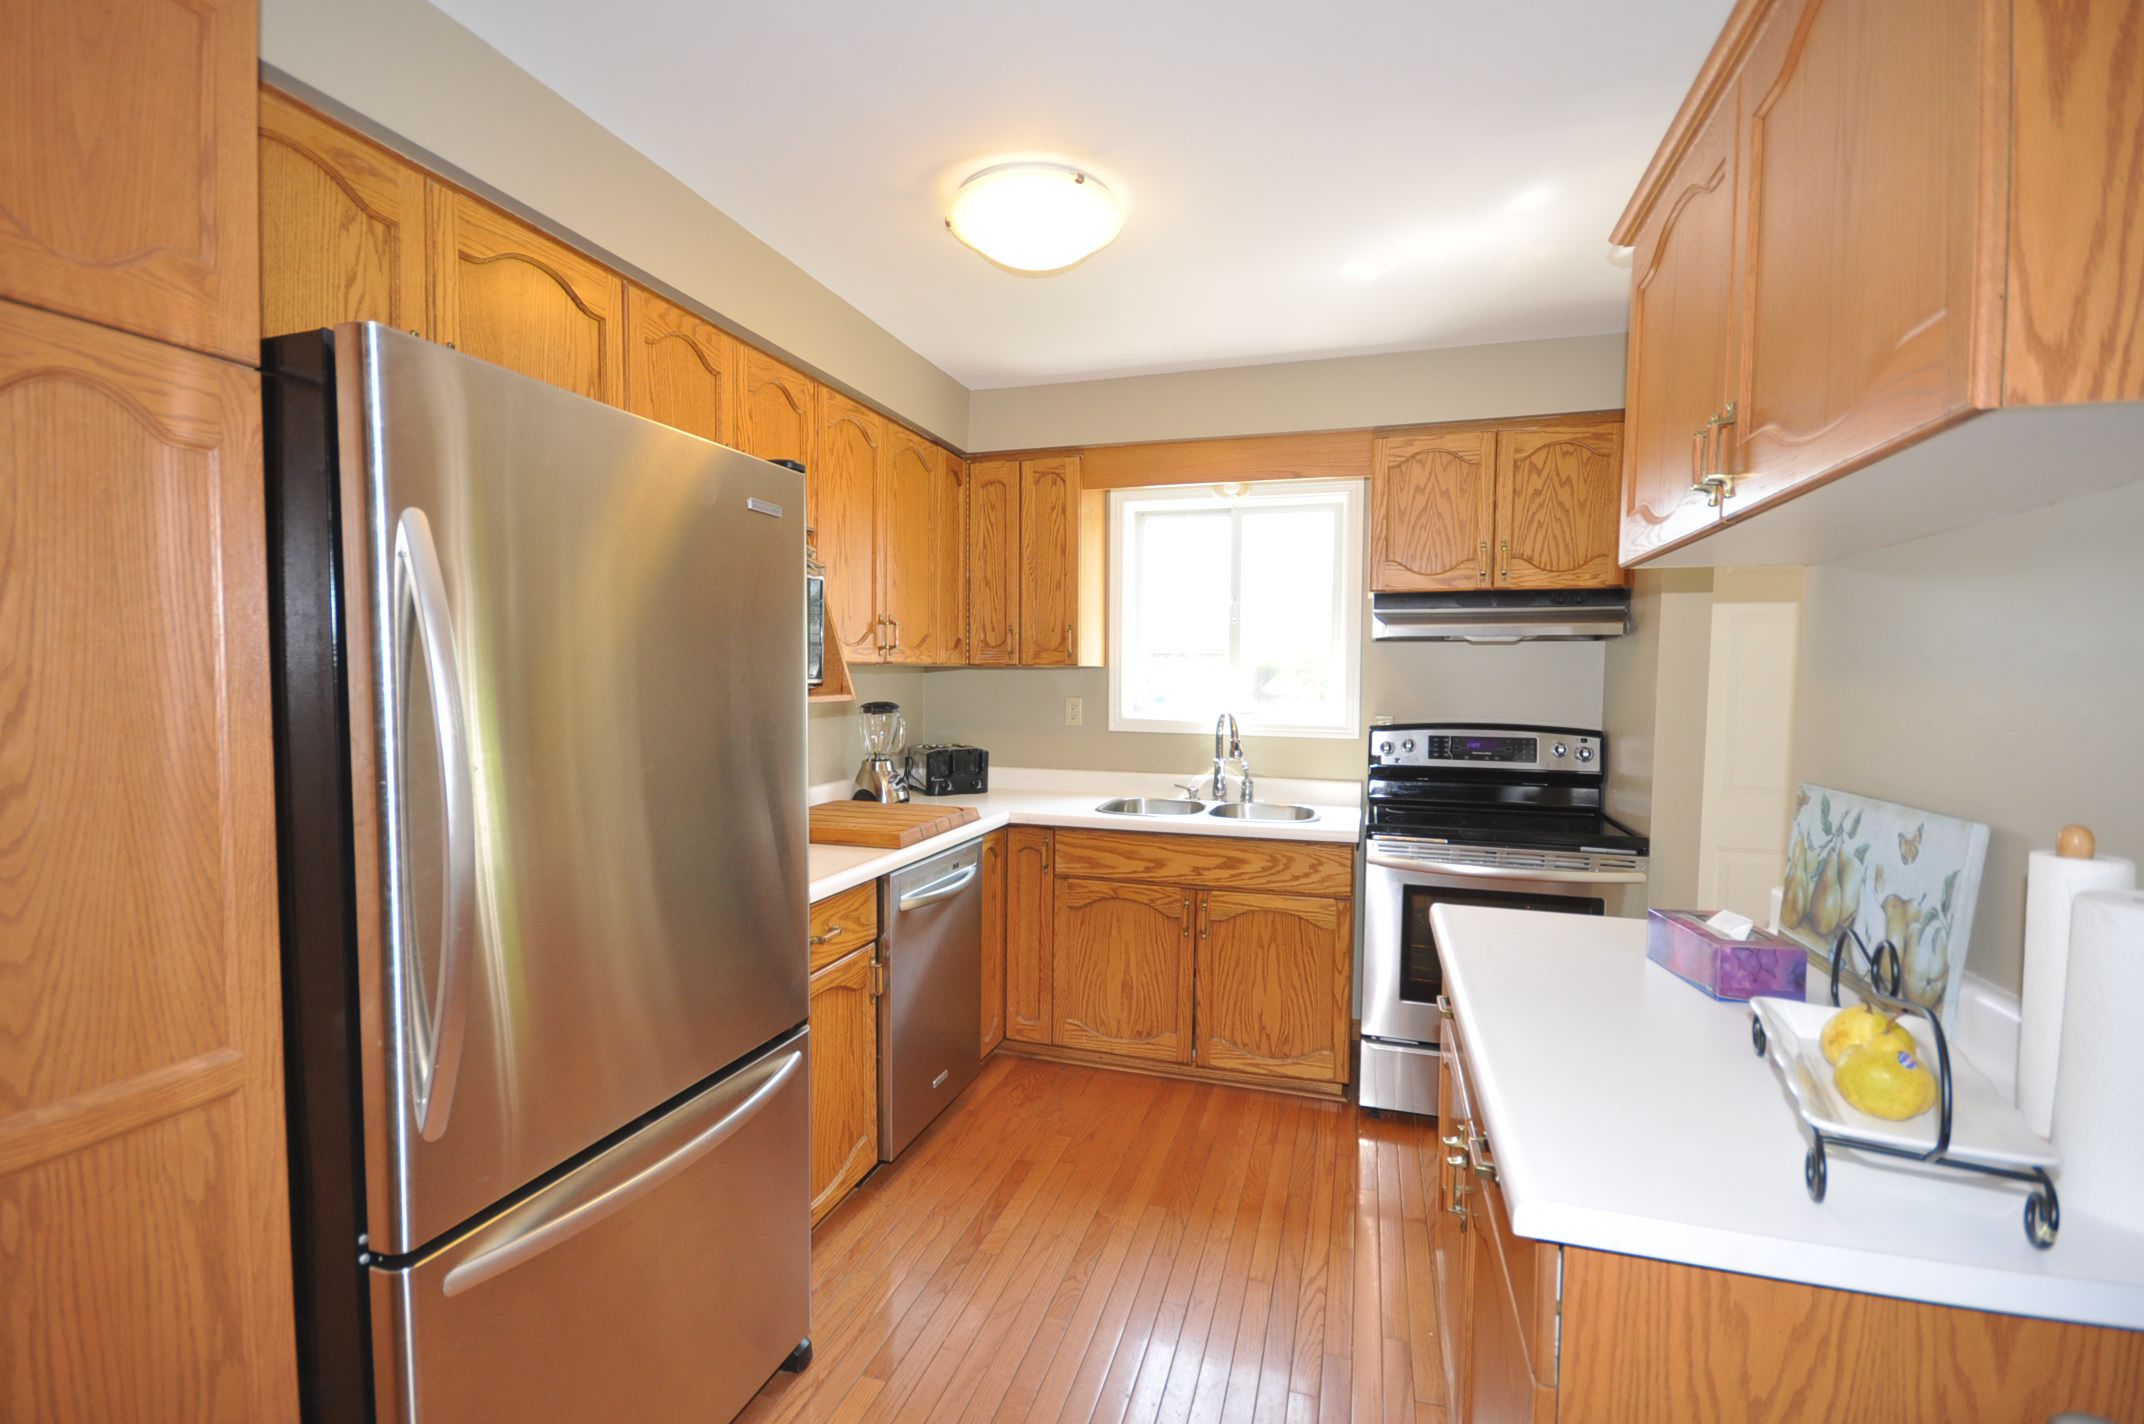 Eat in kitchen with hardwood flooring, pantry & an extra set of cupboards